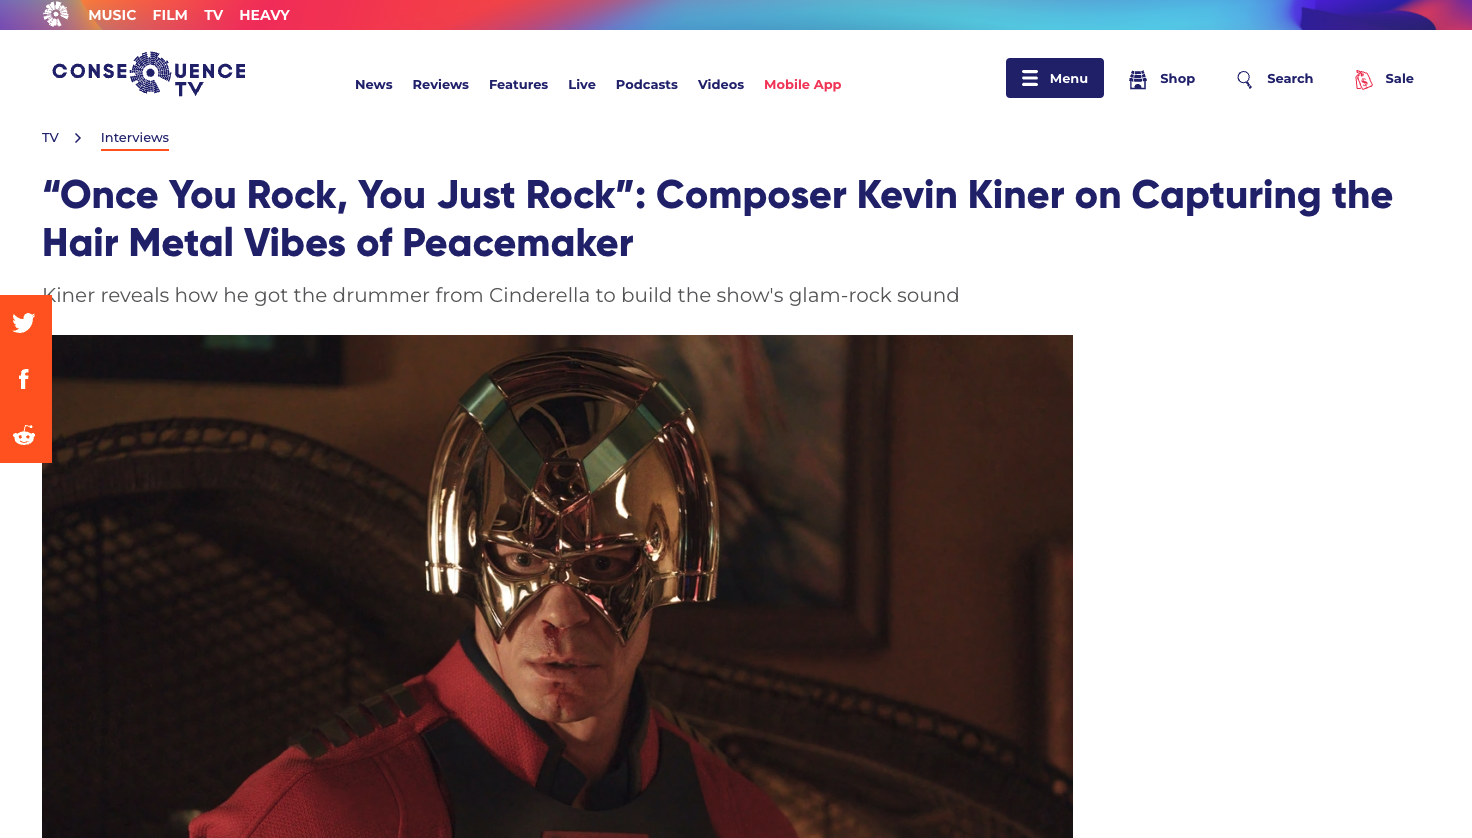 “Once You Rock, You Just Rock”: Composer Kevin Kiner on Capturing the Hair Metal Vibes of Peacemaker